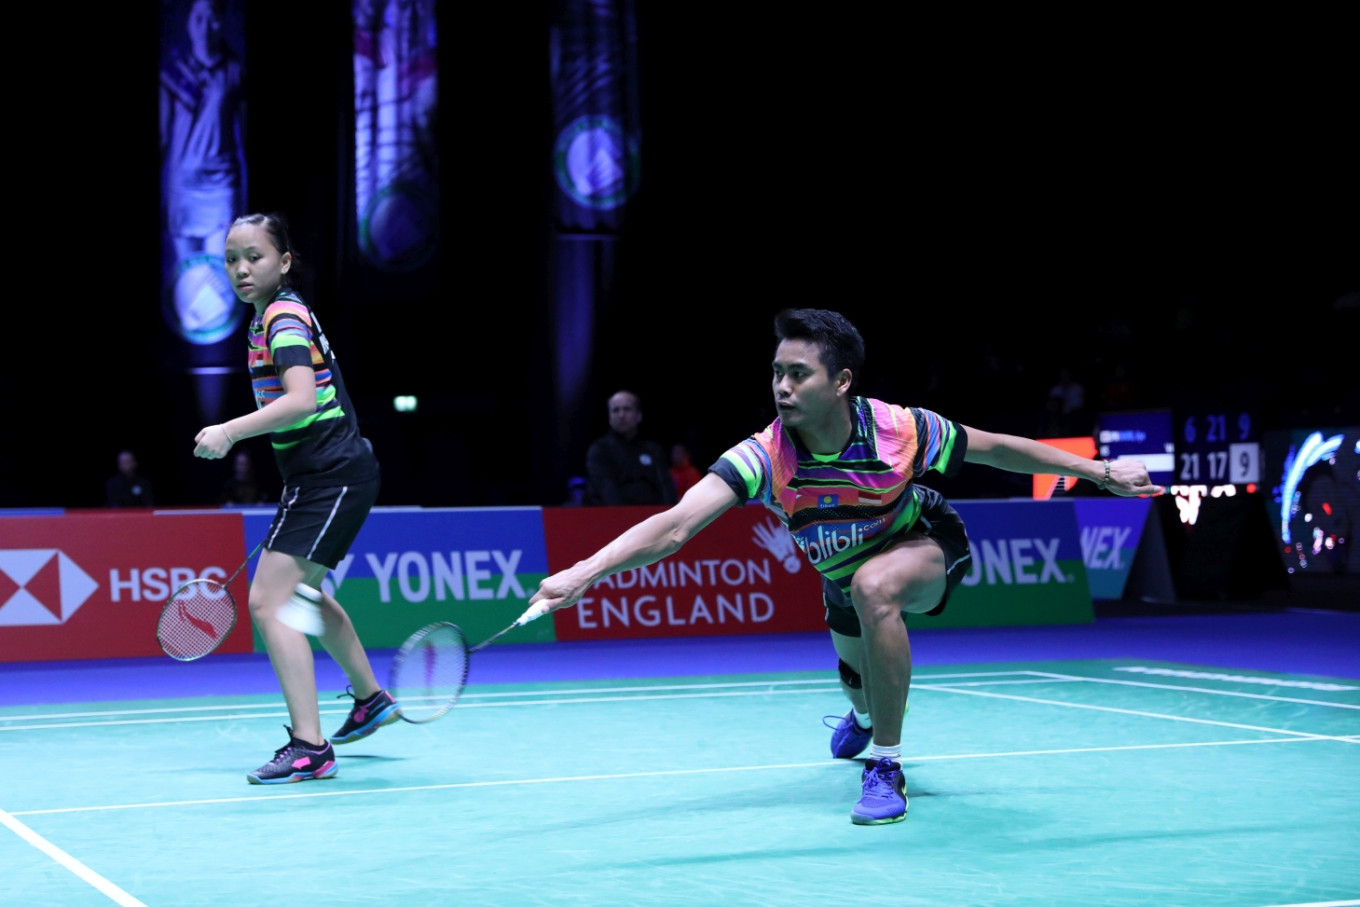 New Indonesian mixed doubles pair books All England quarterfinal spot - Sports The Jakarta